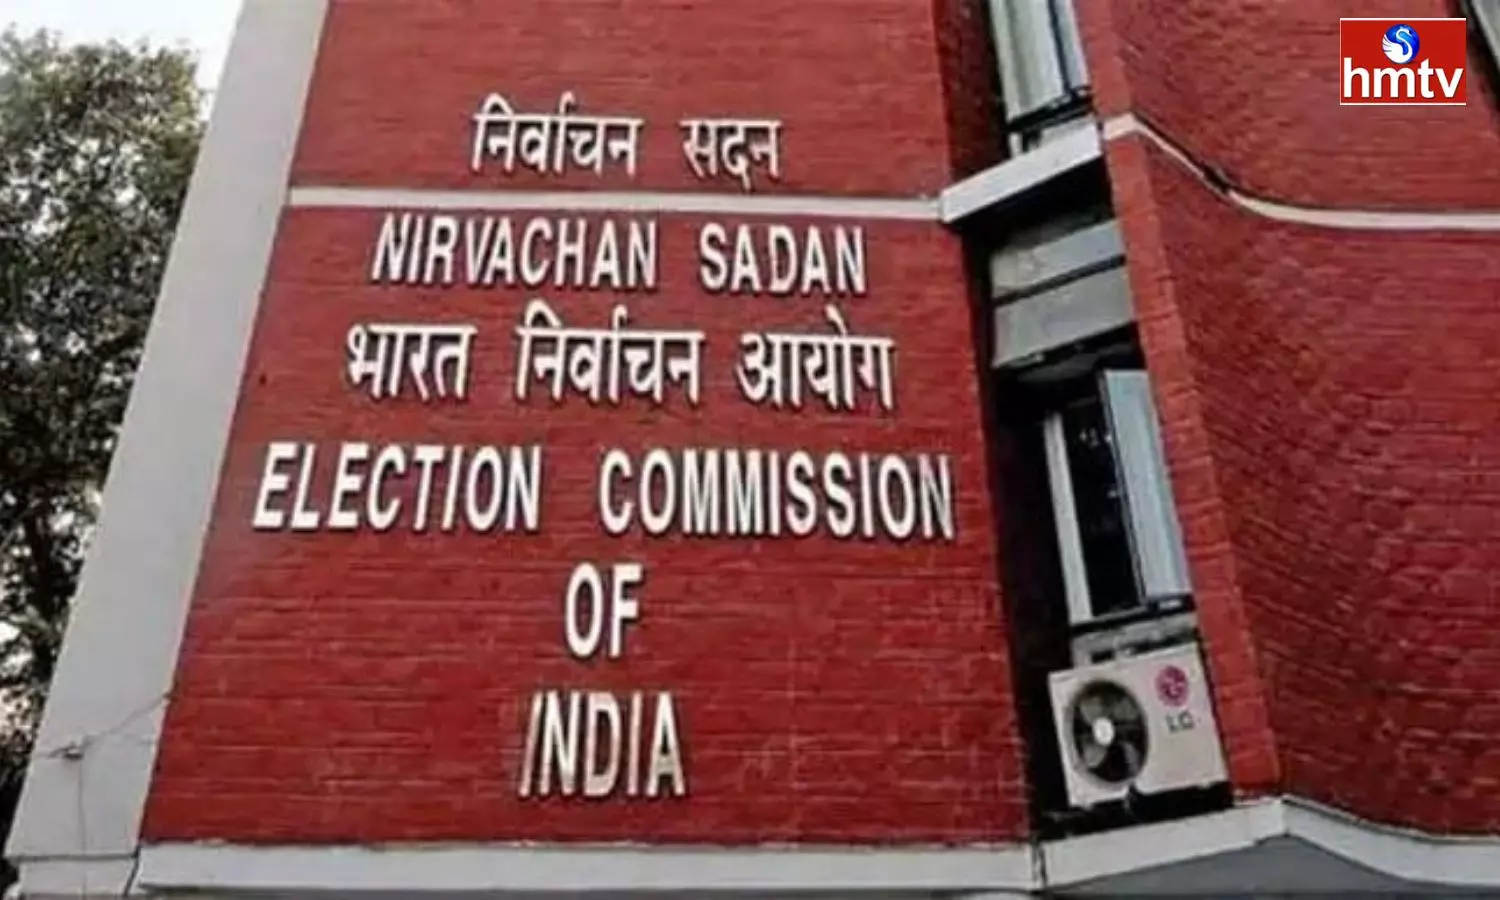 The Election Commission is preventing people from being tempted in elections